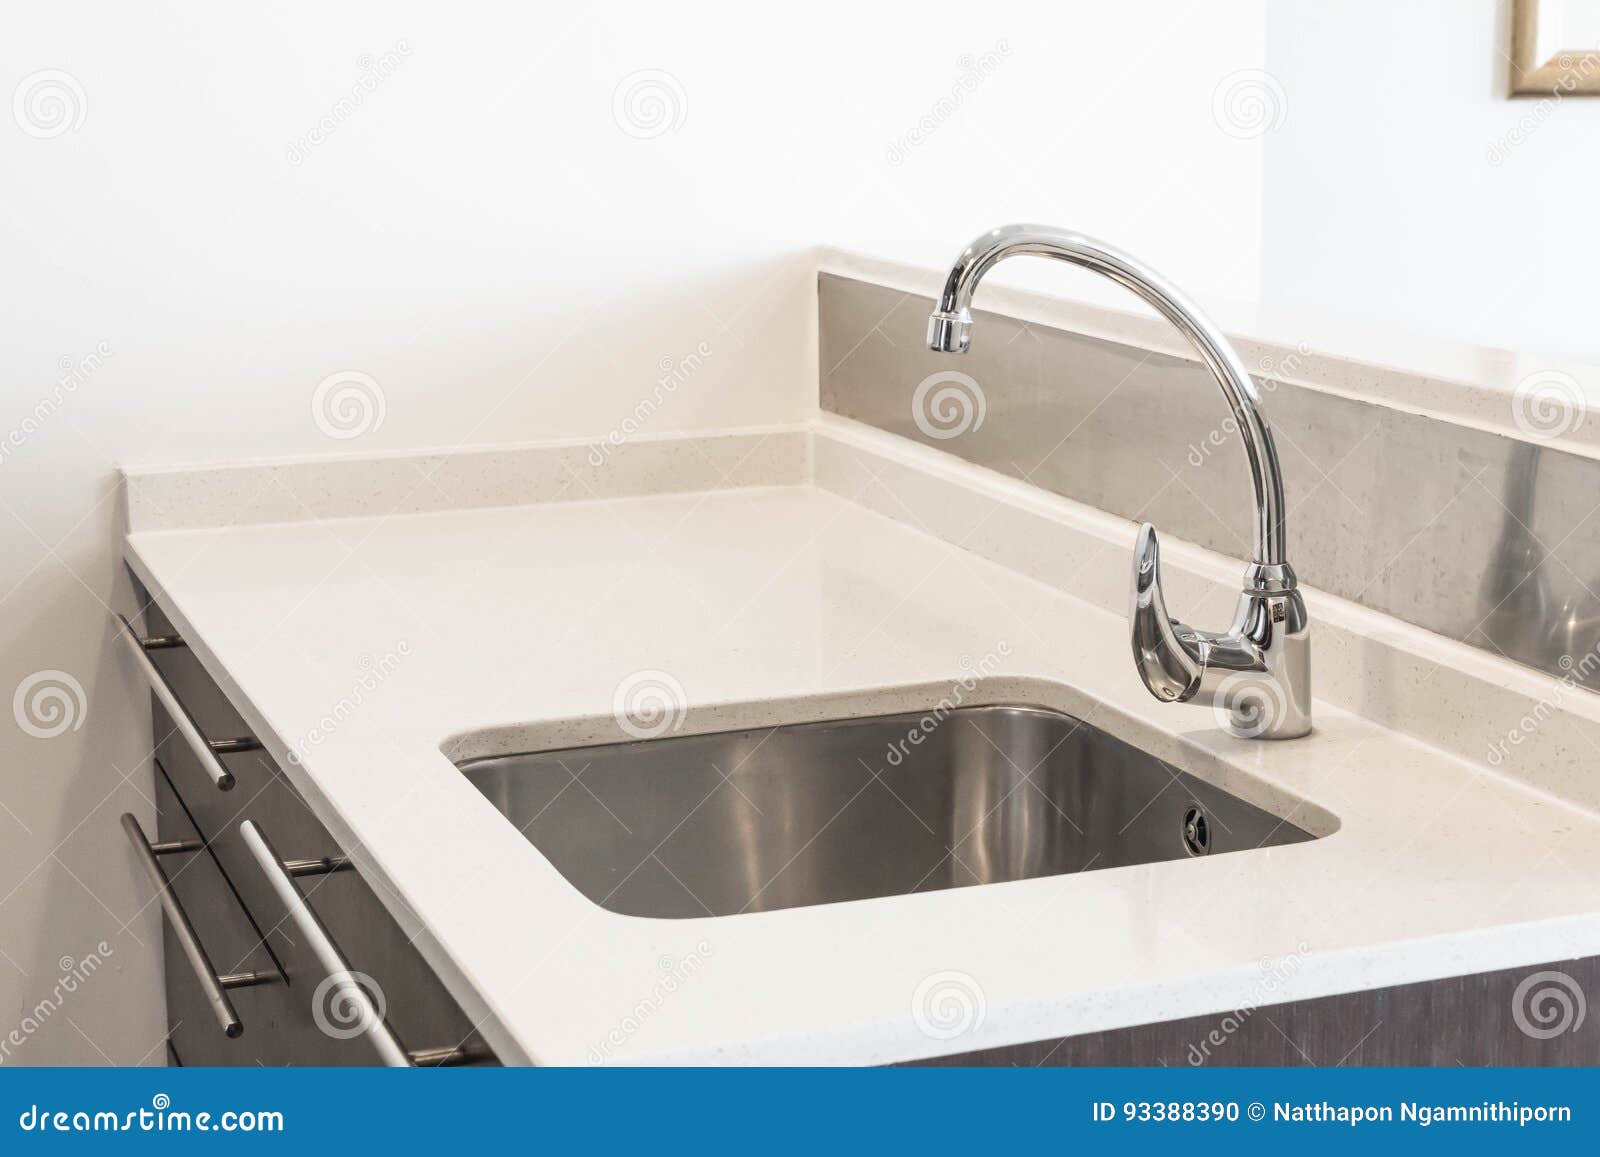 Faucet Sink and Water Tab Decoration in Kitchen Room Stock Photo ...